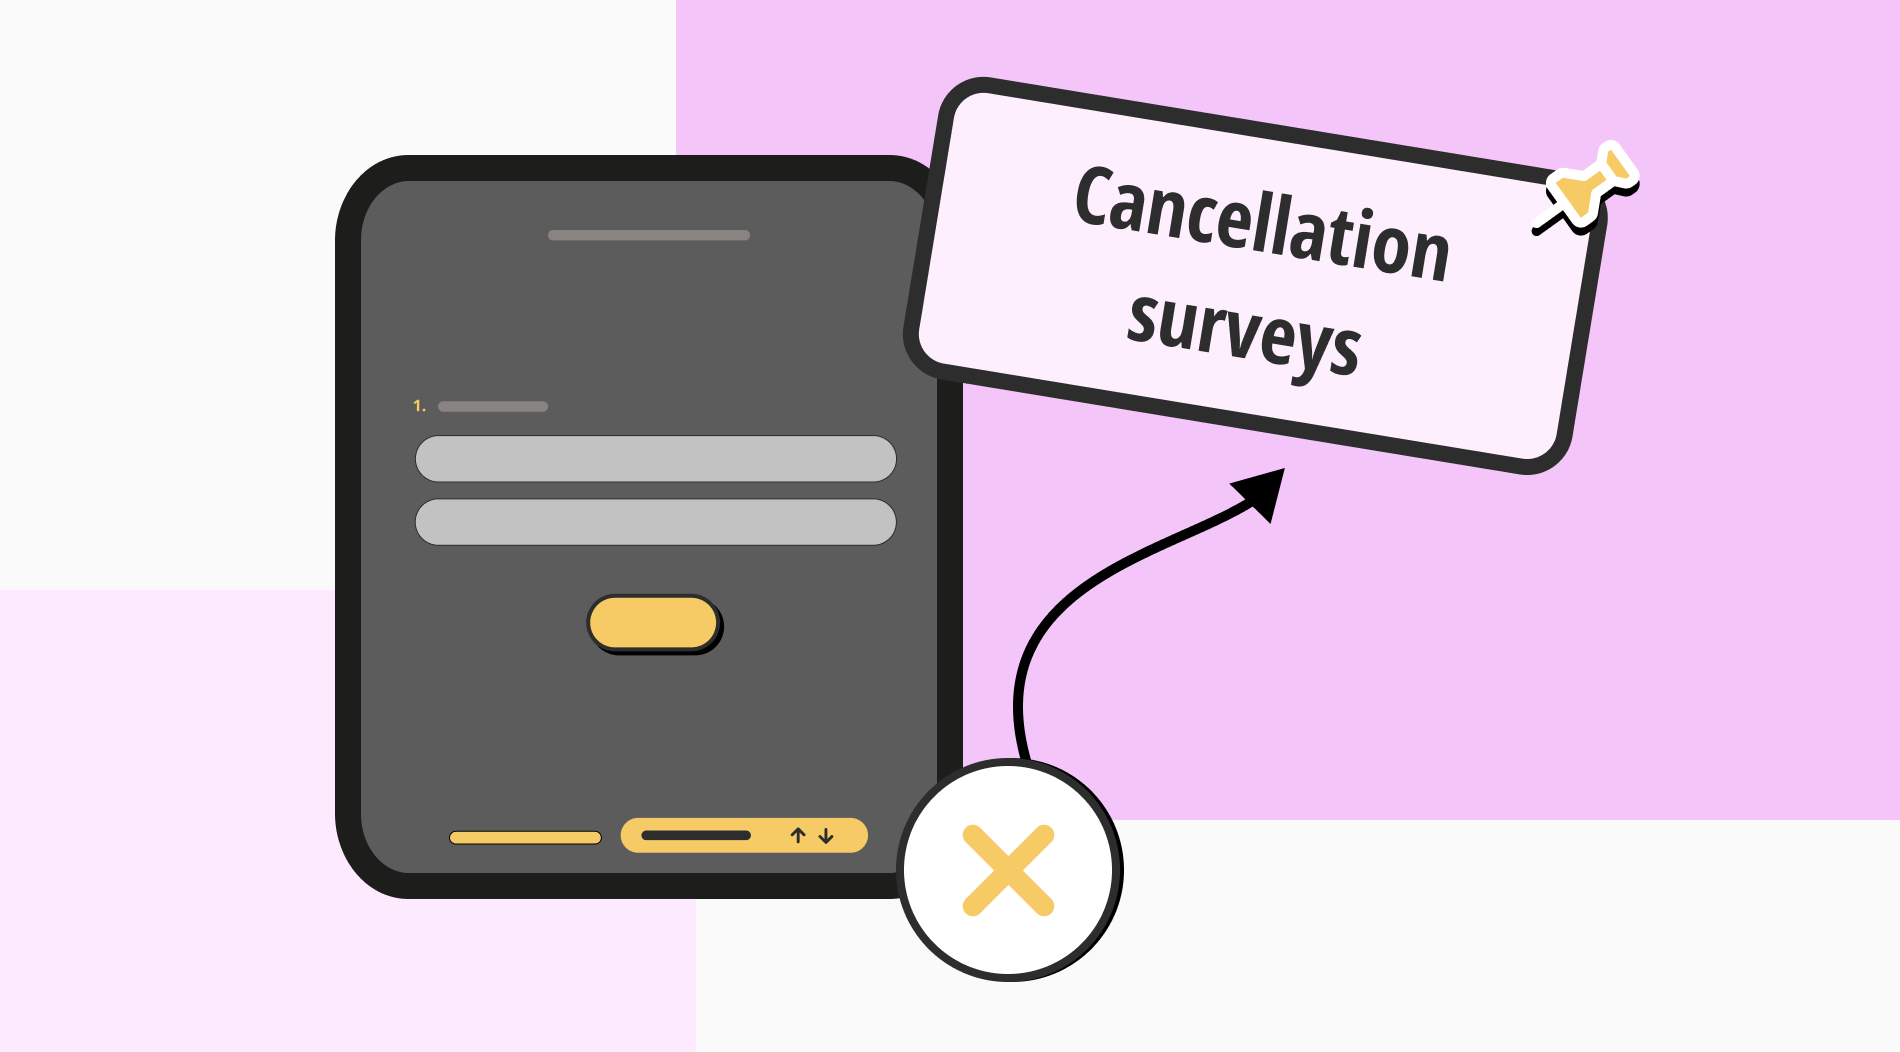 Cancellation surveys: 10 must-ask questions, tips & templates